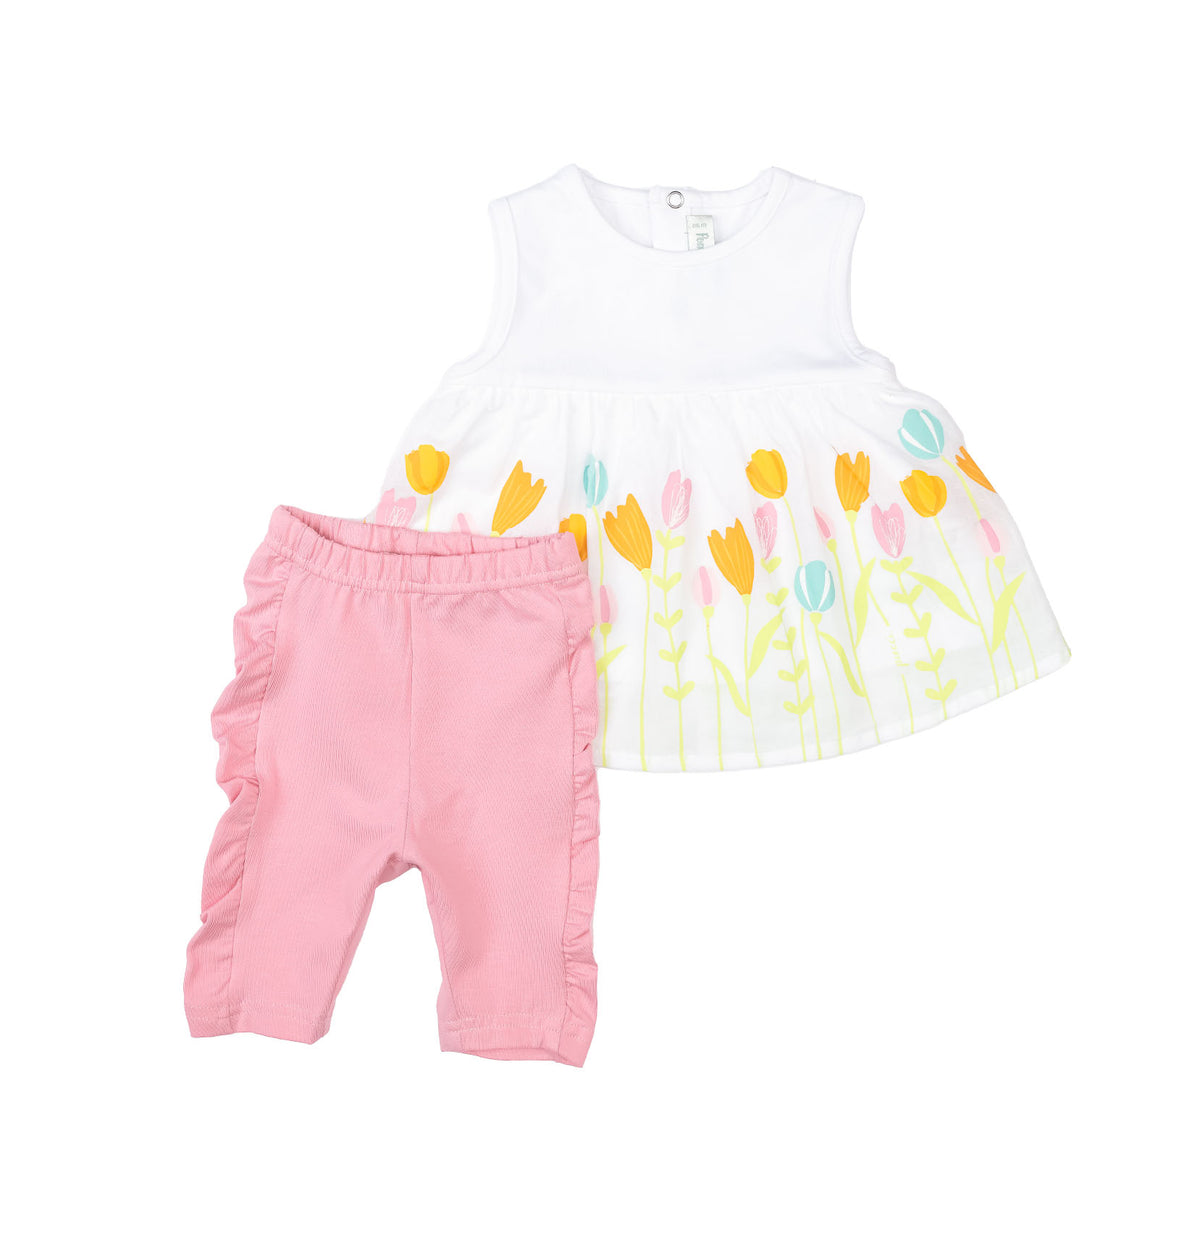 Baby girl colorful set by Pompelo